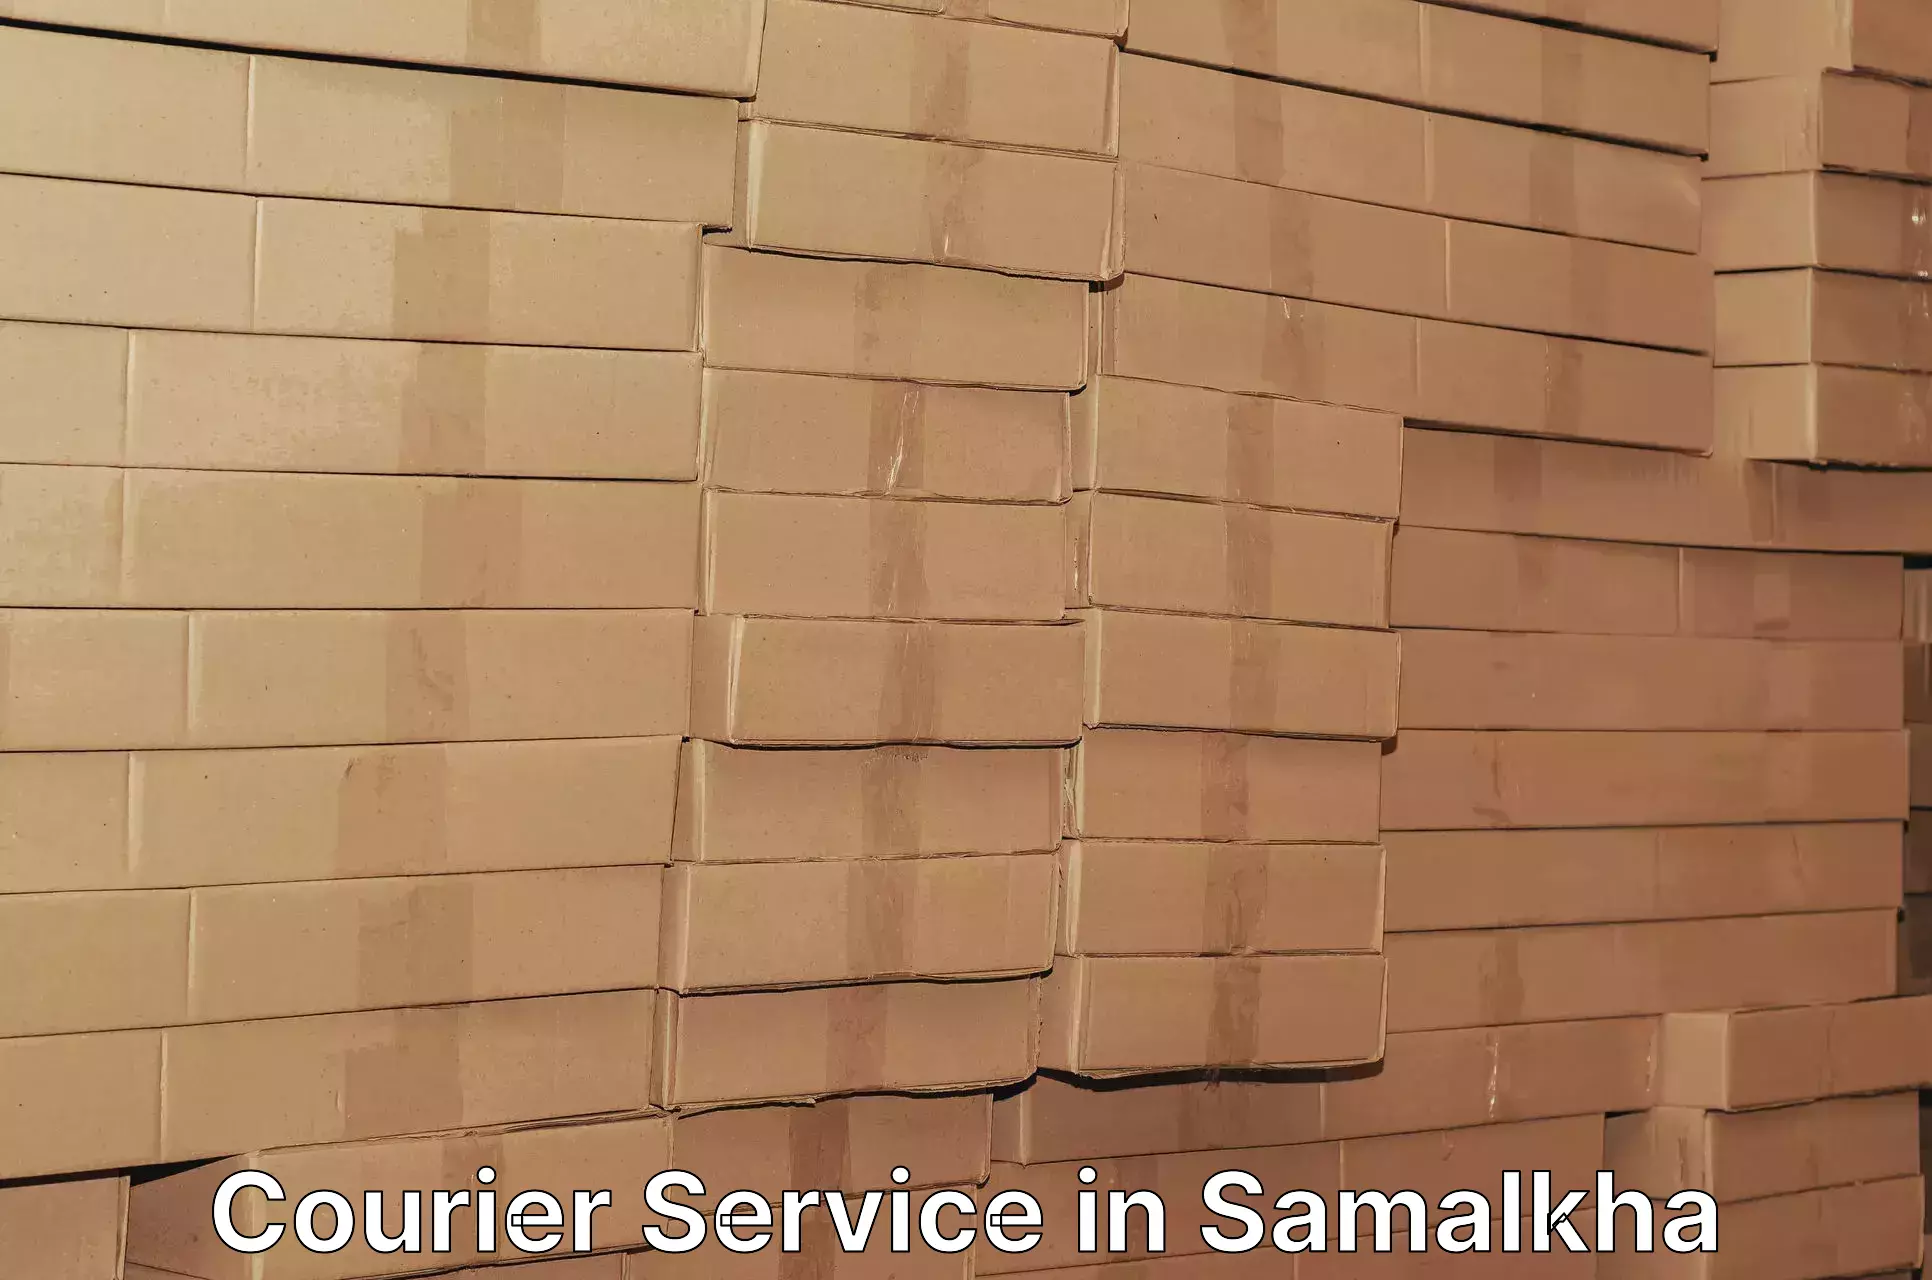 Same-day delivery solutions in Samalkha